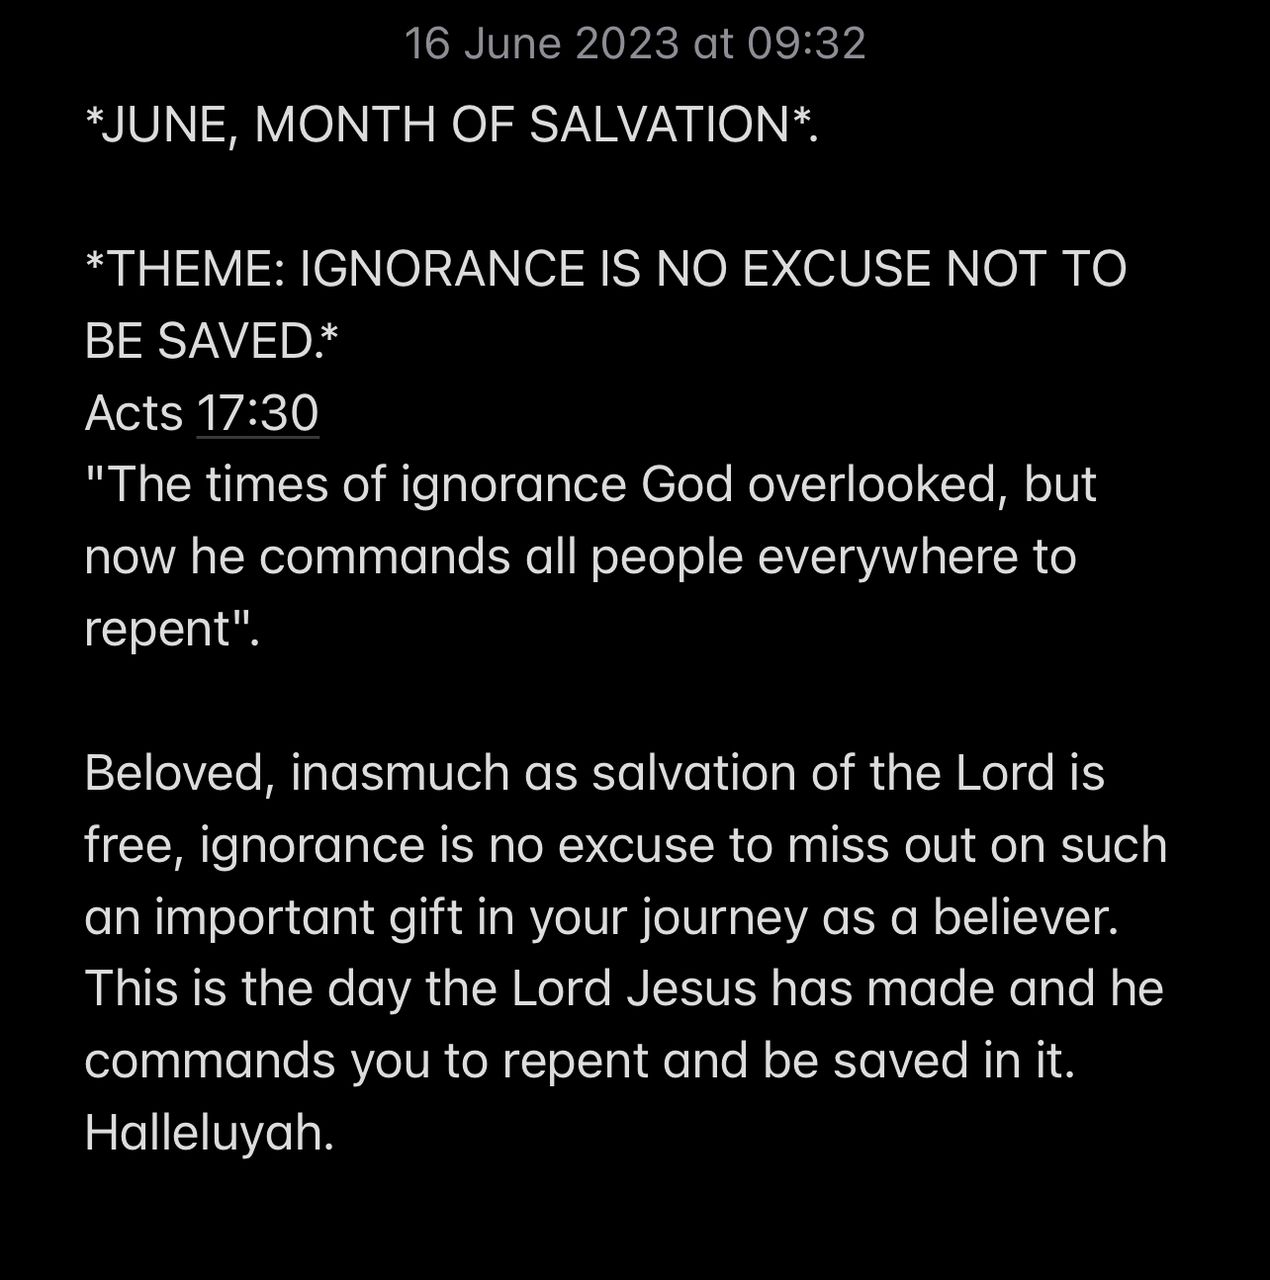 IGNORANCE IS NO EXCUSE WHEN IT COMES TO SALVATION.